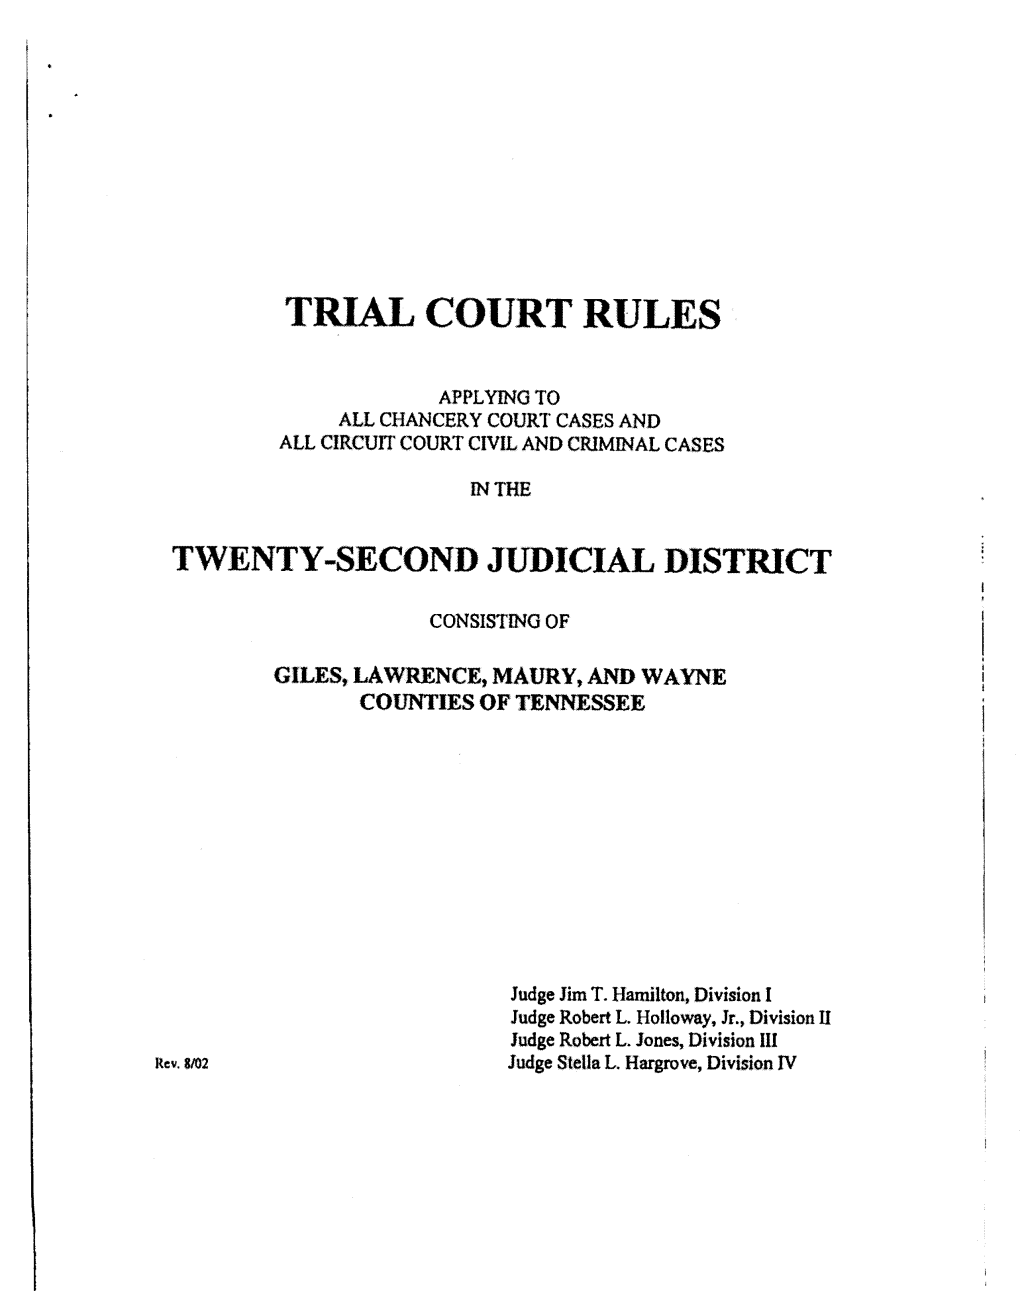 Local Rules for Chancery Court (PDF)